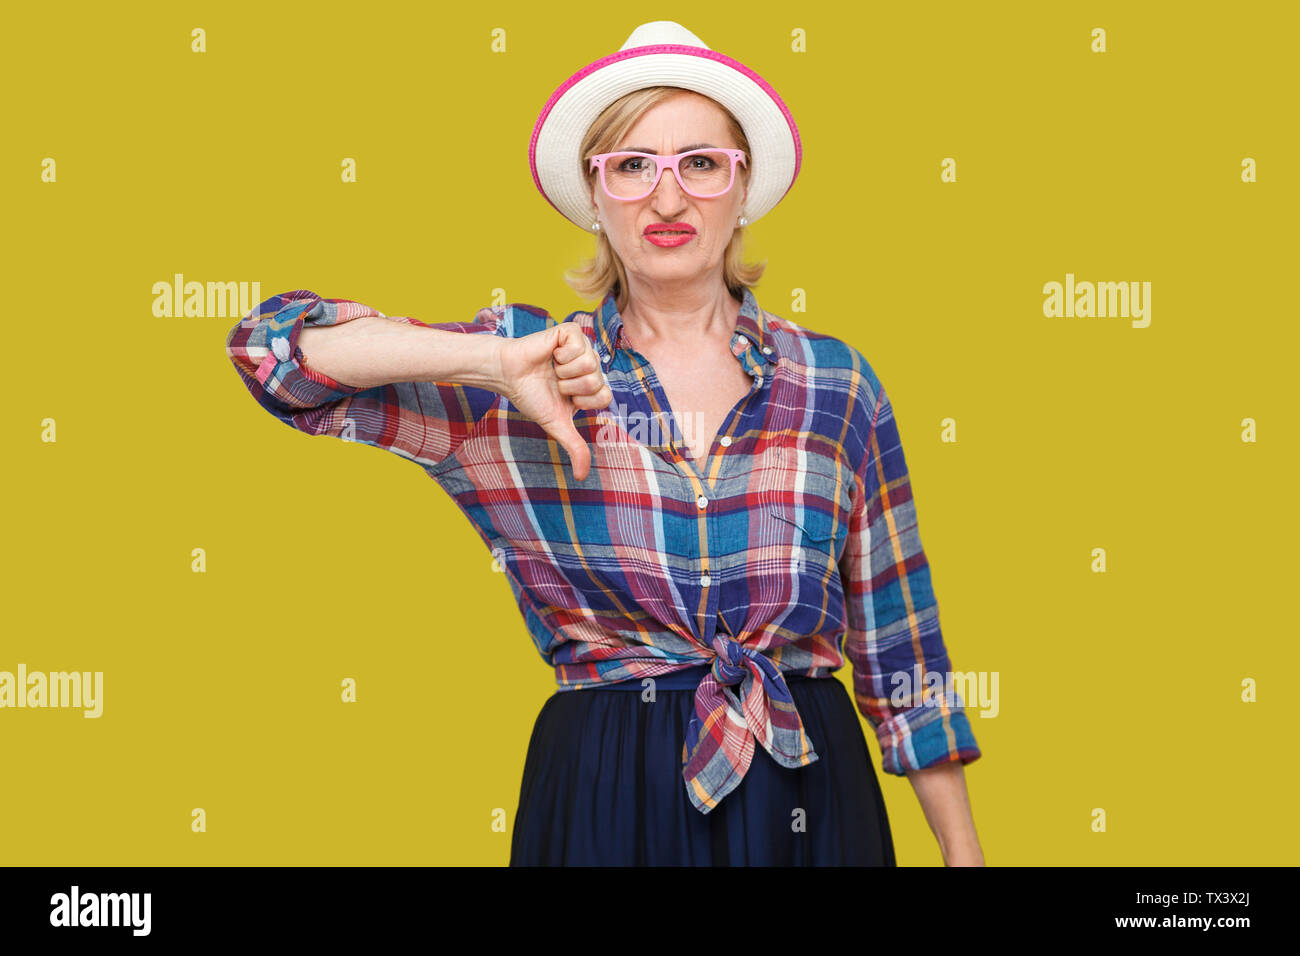 Dislike. Portrait of sad dissatisfied modern stylish mature woman in casual style with hat and eyeglasses standing looking at camera with thumb down. Stock Photo